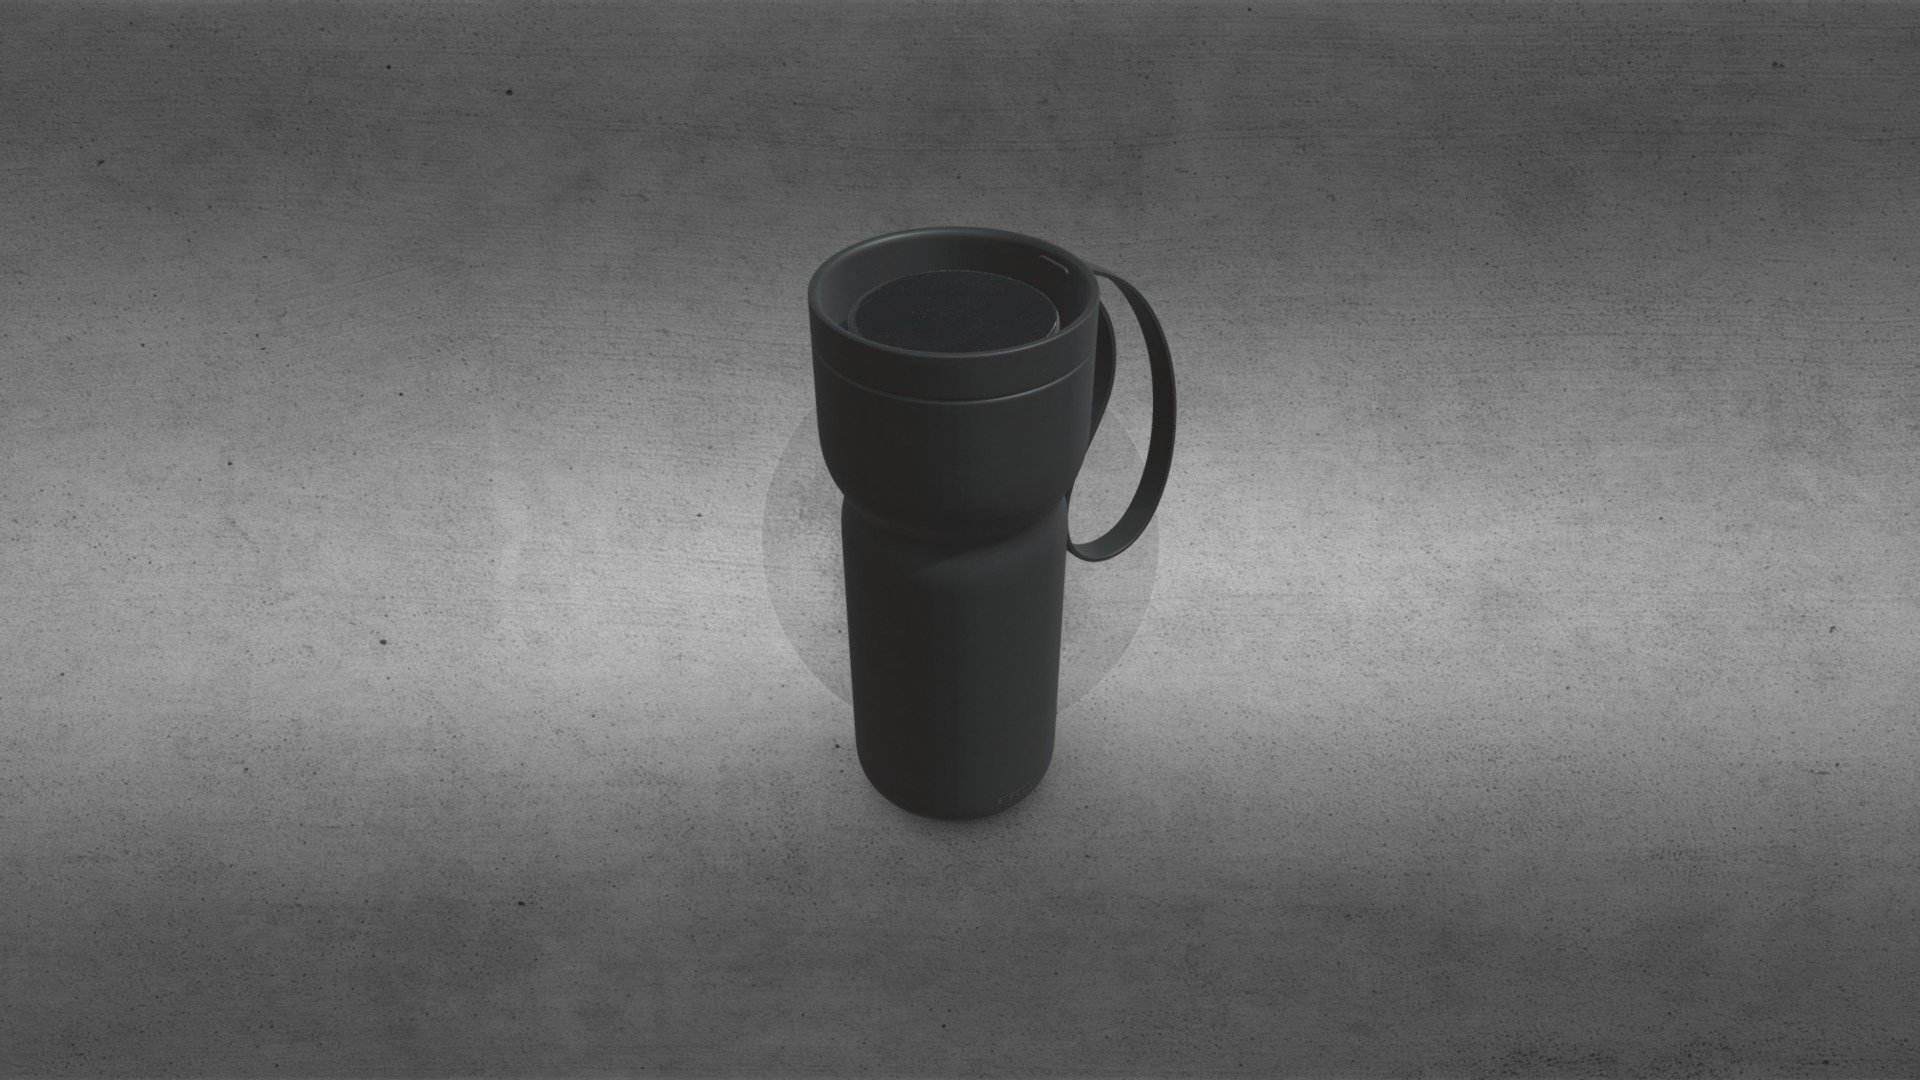 3d model of a Nordic Kitchen Thermo Tea cup by Eva Solo.
Best use for adding detail on your Architectural Visualization or Interior Design.
This product is made in Blender and ready to render in Cycle. Unit setup is metres and the models are scaled to match real life objects.
The model comes with textures and materials and is positioned in the center of the coordinates system.
No additional plugin is needed to open the model.

Notes:

Geometry: Polygonal

Textures: Yes

Rigged: No

Animated: No

UV Mapped: Yes

Unwrapped UVs: Yes, non-overlapping

Bake all map

Hope you like it! Thank you!

My youtube channel : https://www.youtube.com/toss90 - Nordic Kitchen Thermo Tea cup by Eva Solo - Buy Royalty Free 3D model by Toss90 3d model